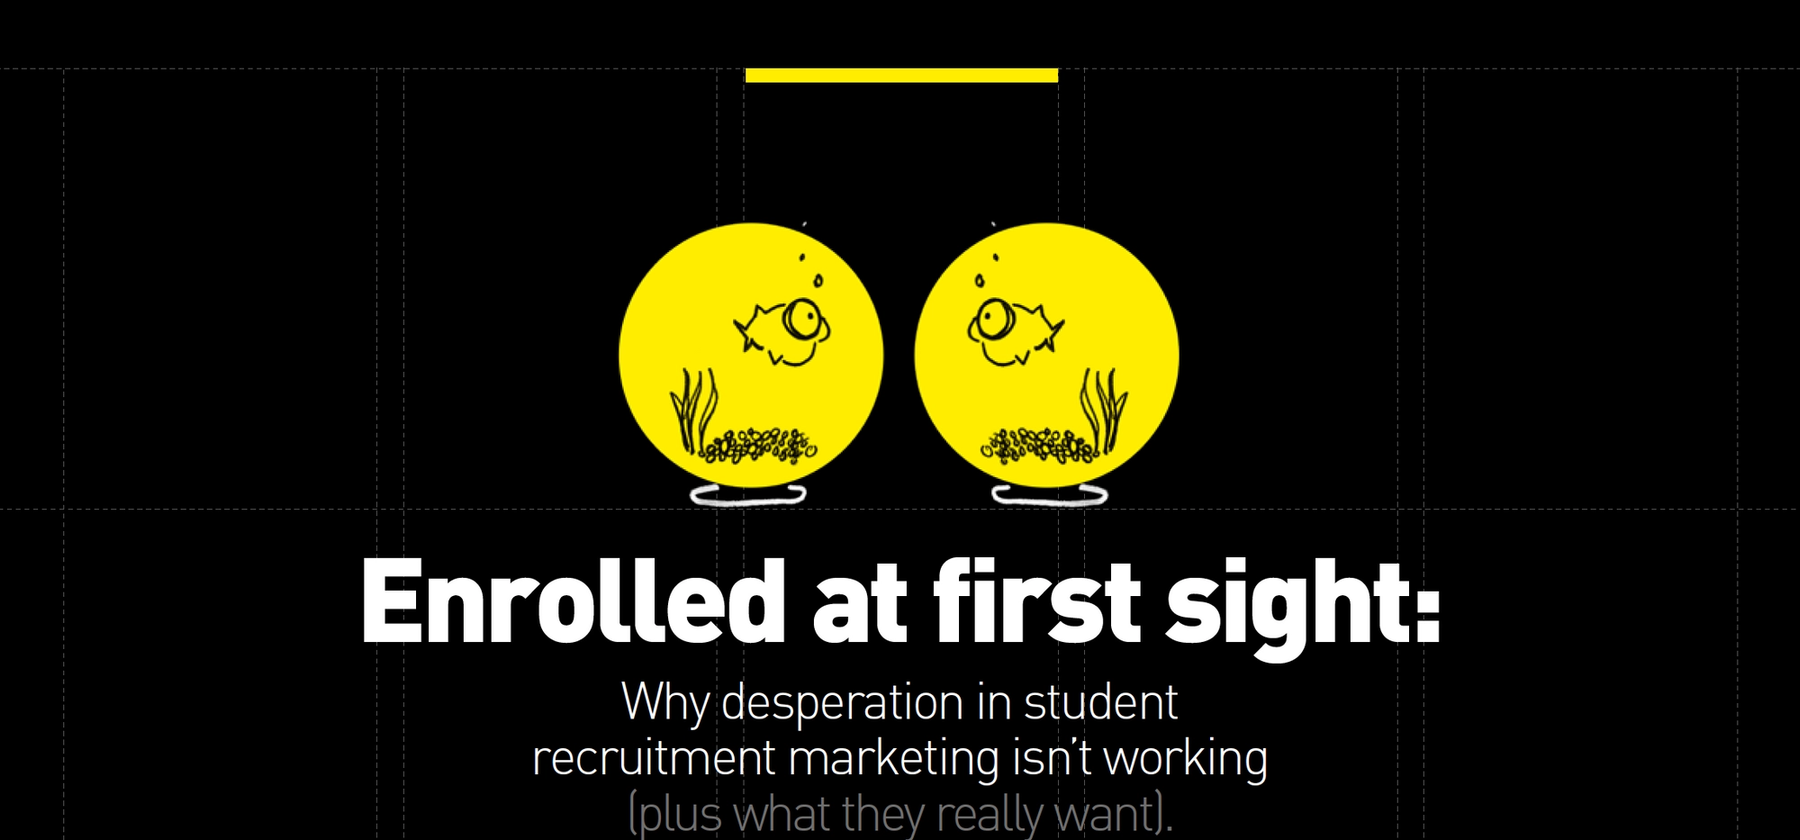 Why desperation in student recruitment marketing isn’t working